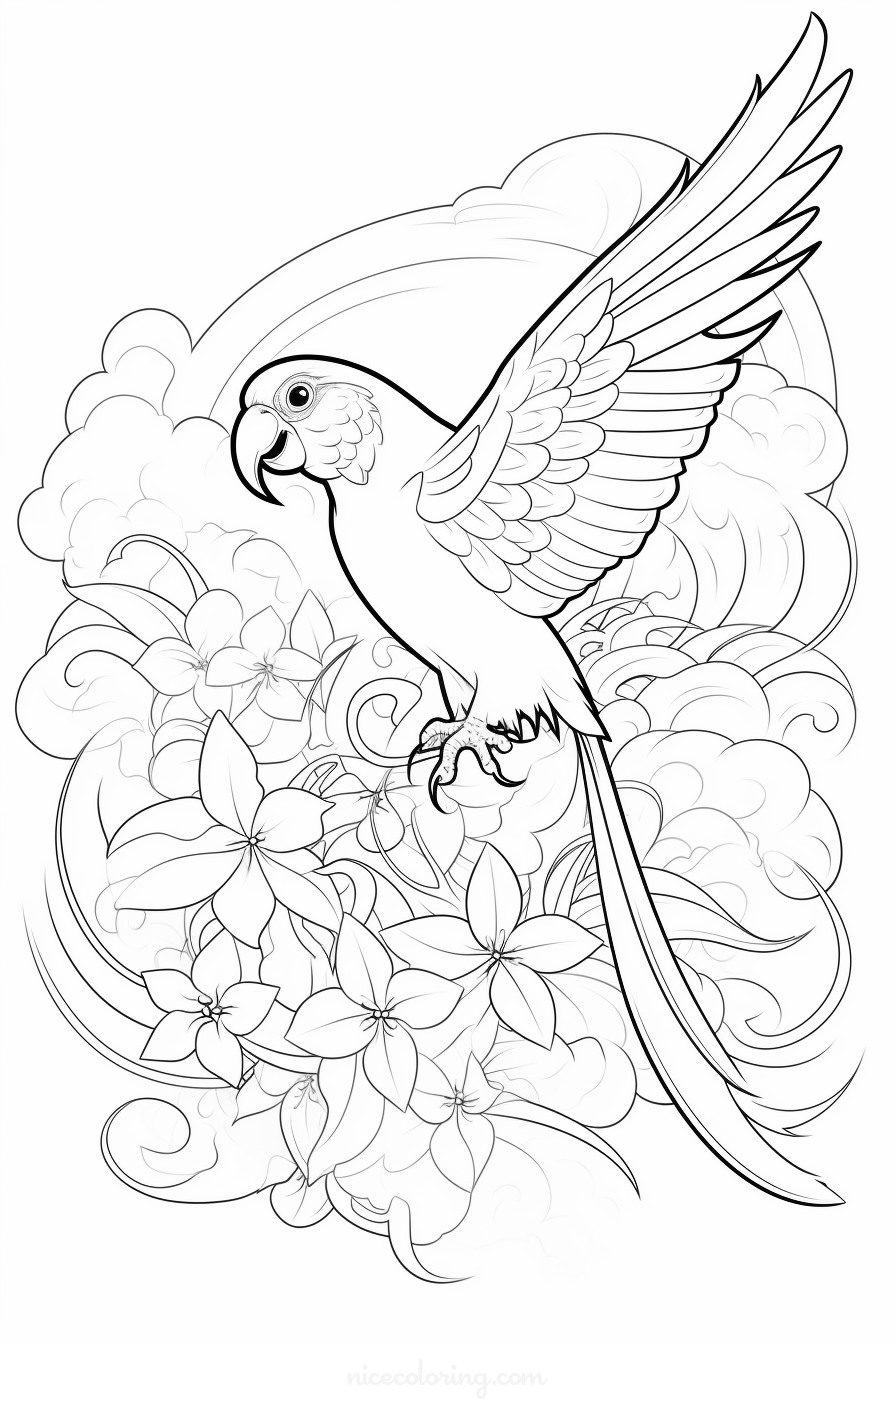 Eagle soaring above mountains coloring page